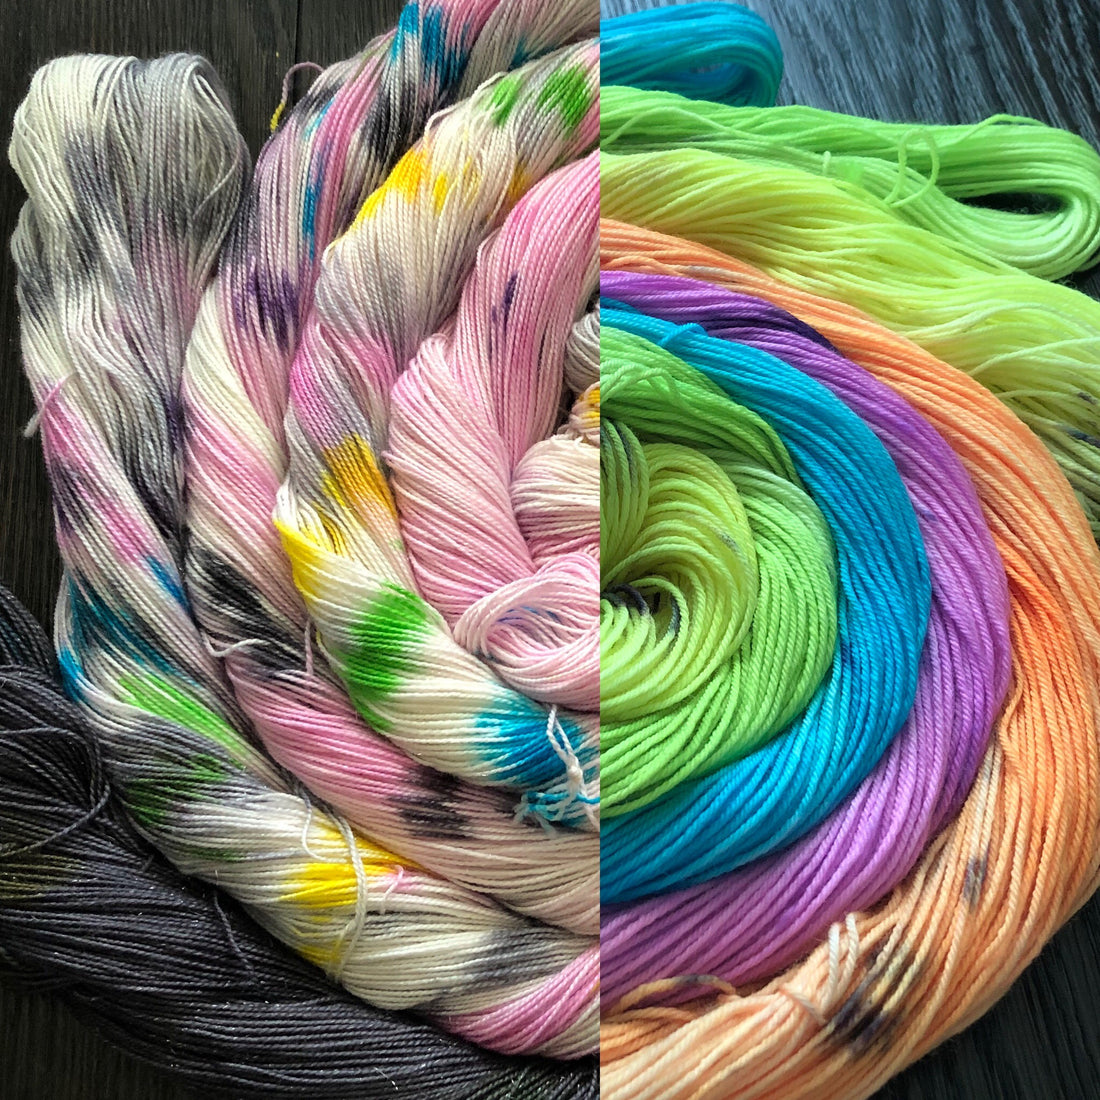 One Year of Yarn!  So exciting.